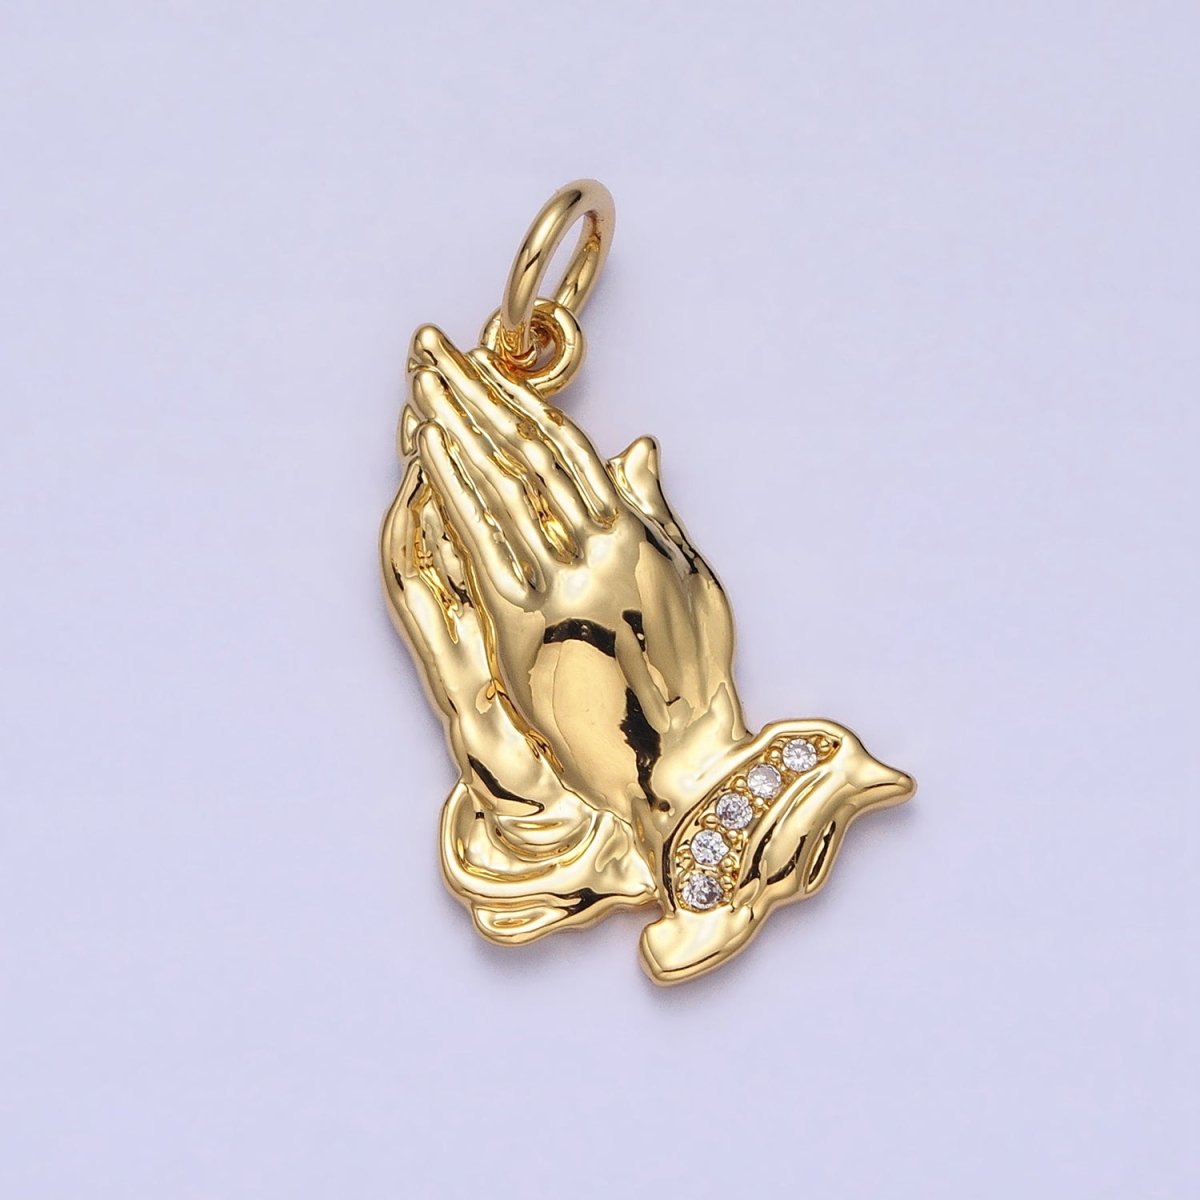 24K Gold Filled Prayer Hands Religious Add-On Charm | AC372 - DLUXCA